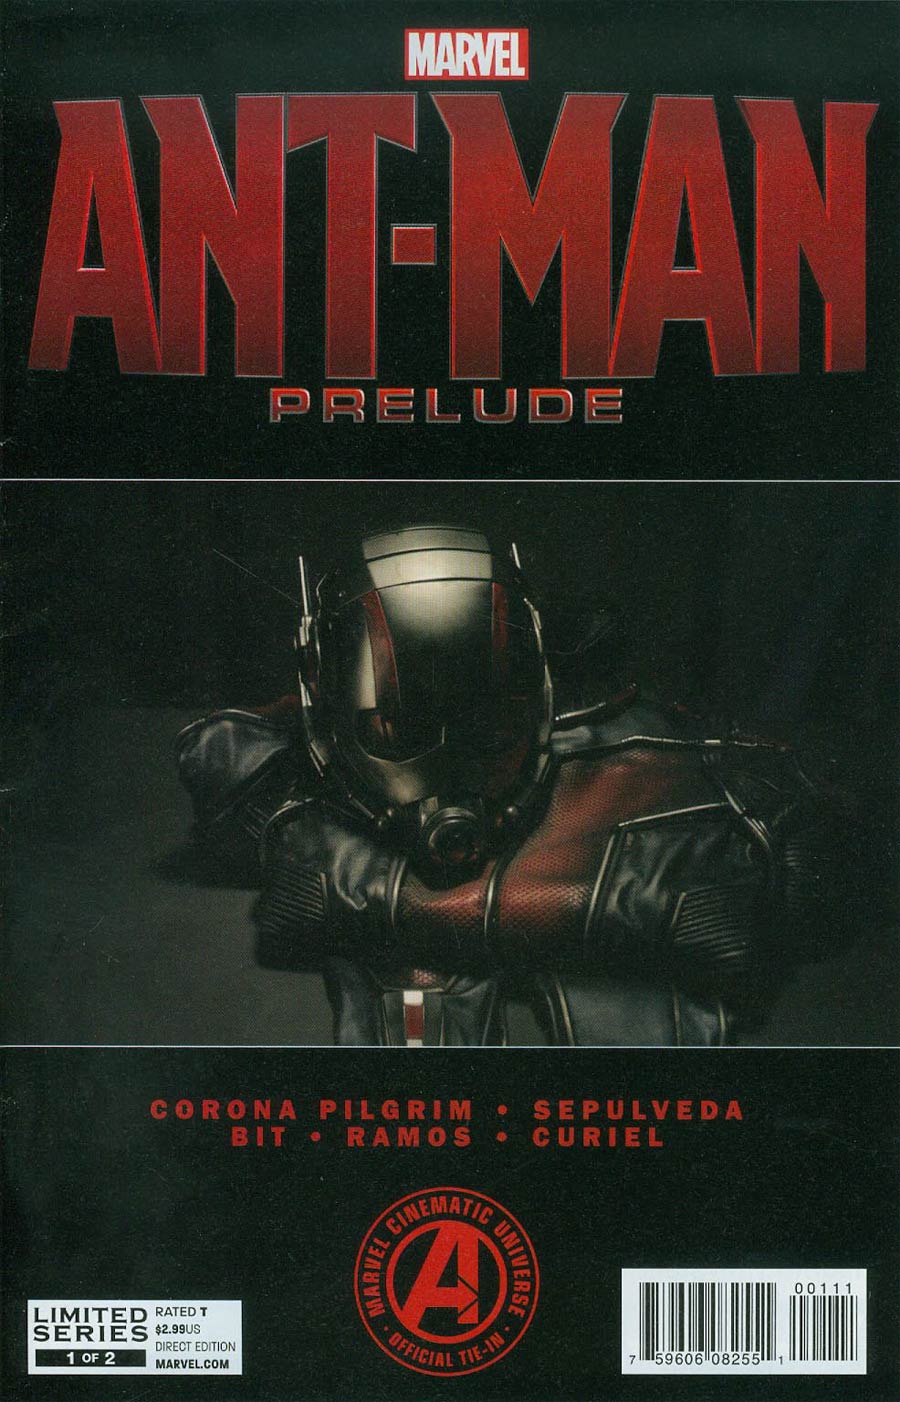 Marvels Ant-Man Prelude #1